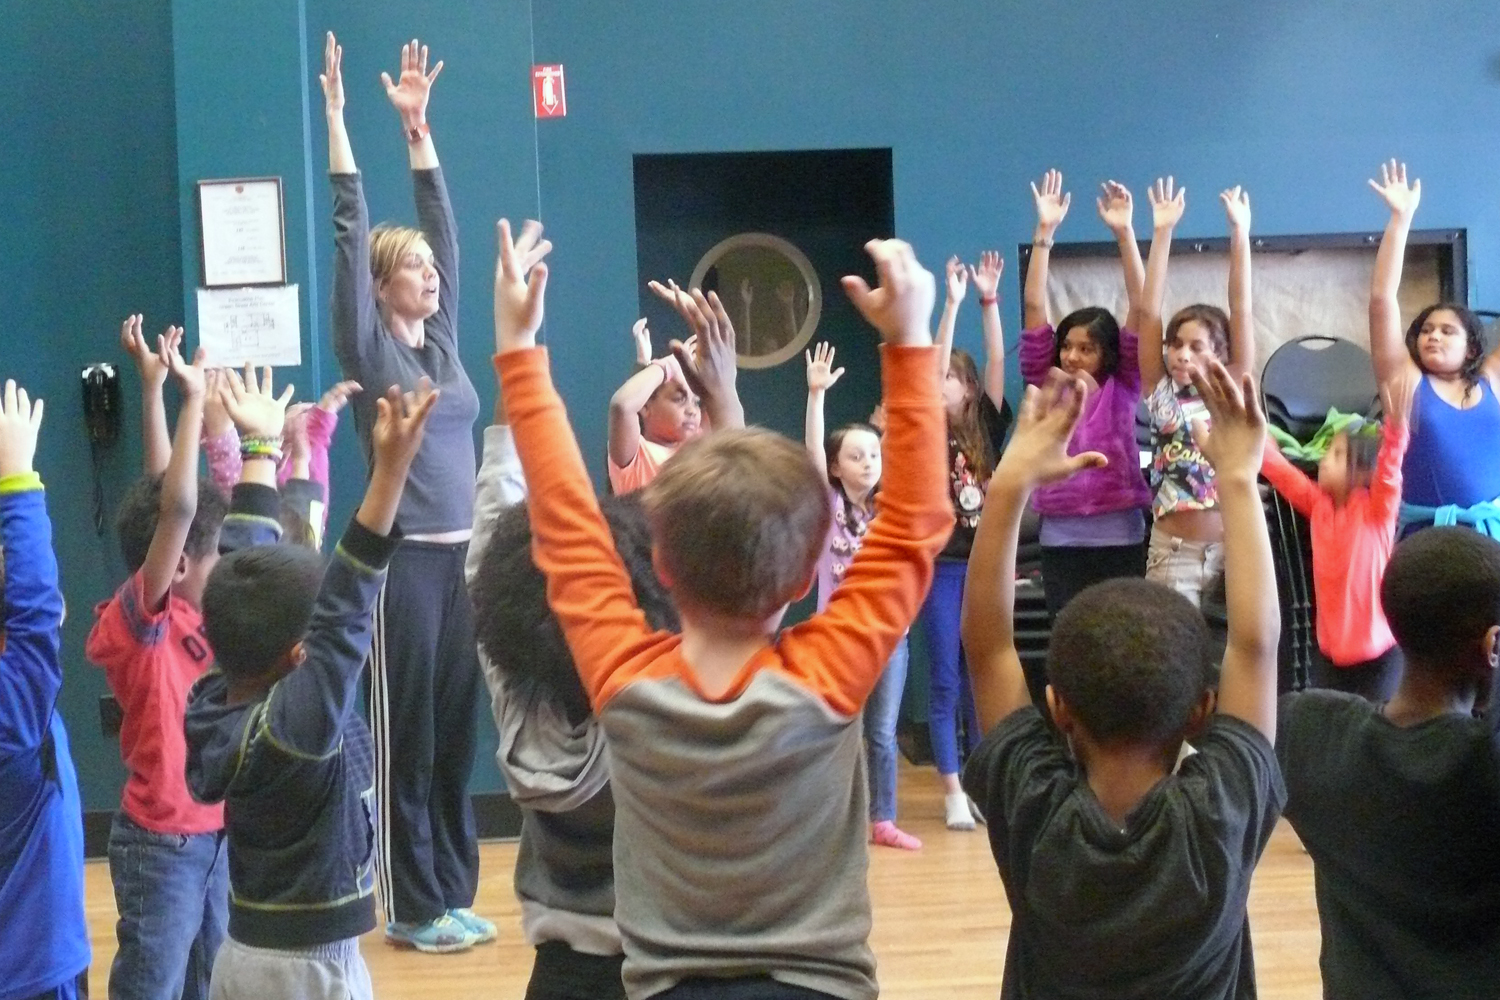 Wesleyan Scholar-in-Residence Allison Orr conducted a dance workshop for the children in the AfterSchool program at the Green Street Teaching and Learning Center on March 7